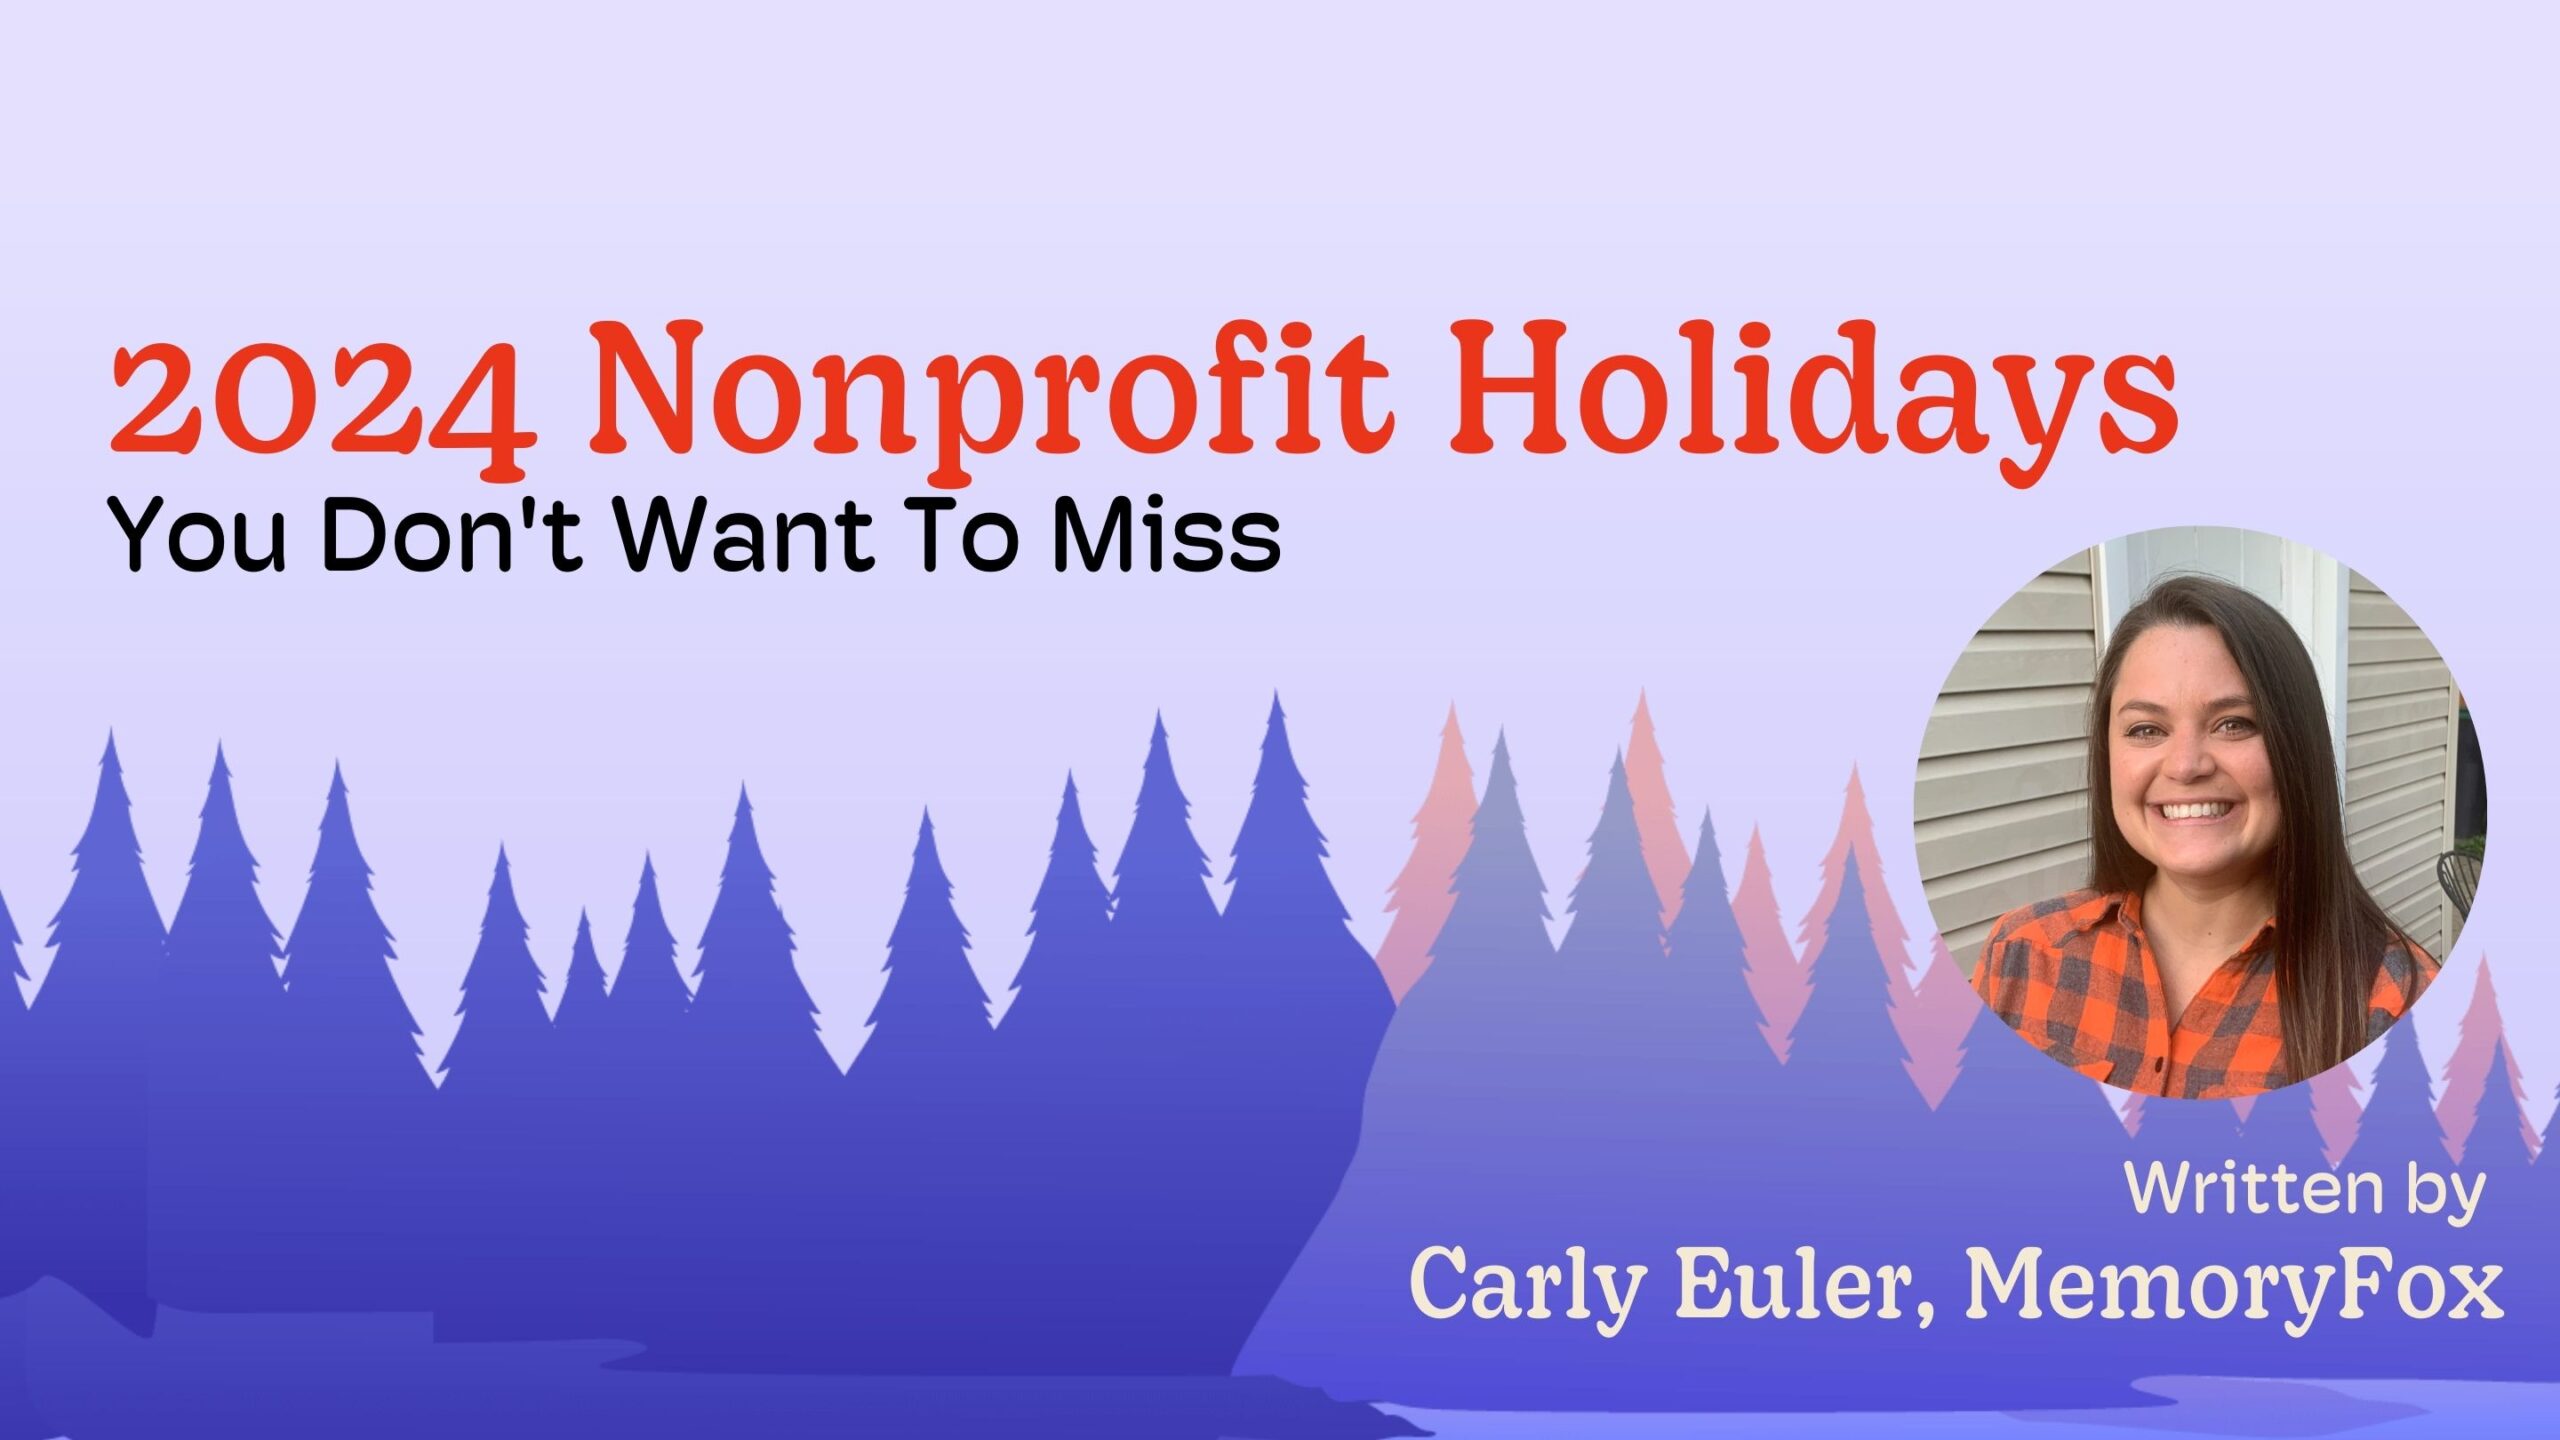 2024 Nonprofit Holidays You Don't Want To Miss MemoryFox